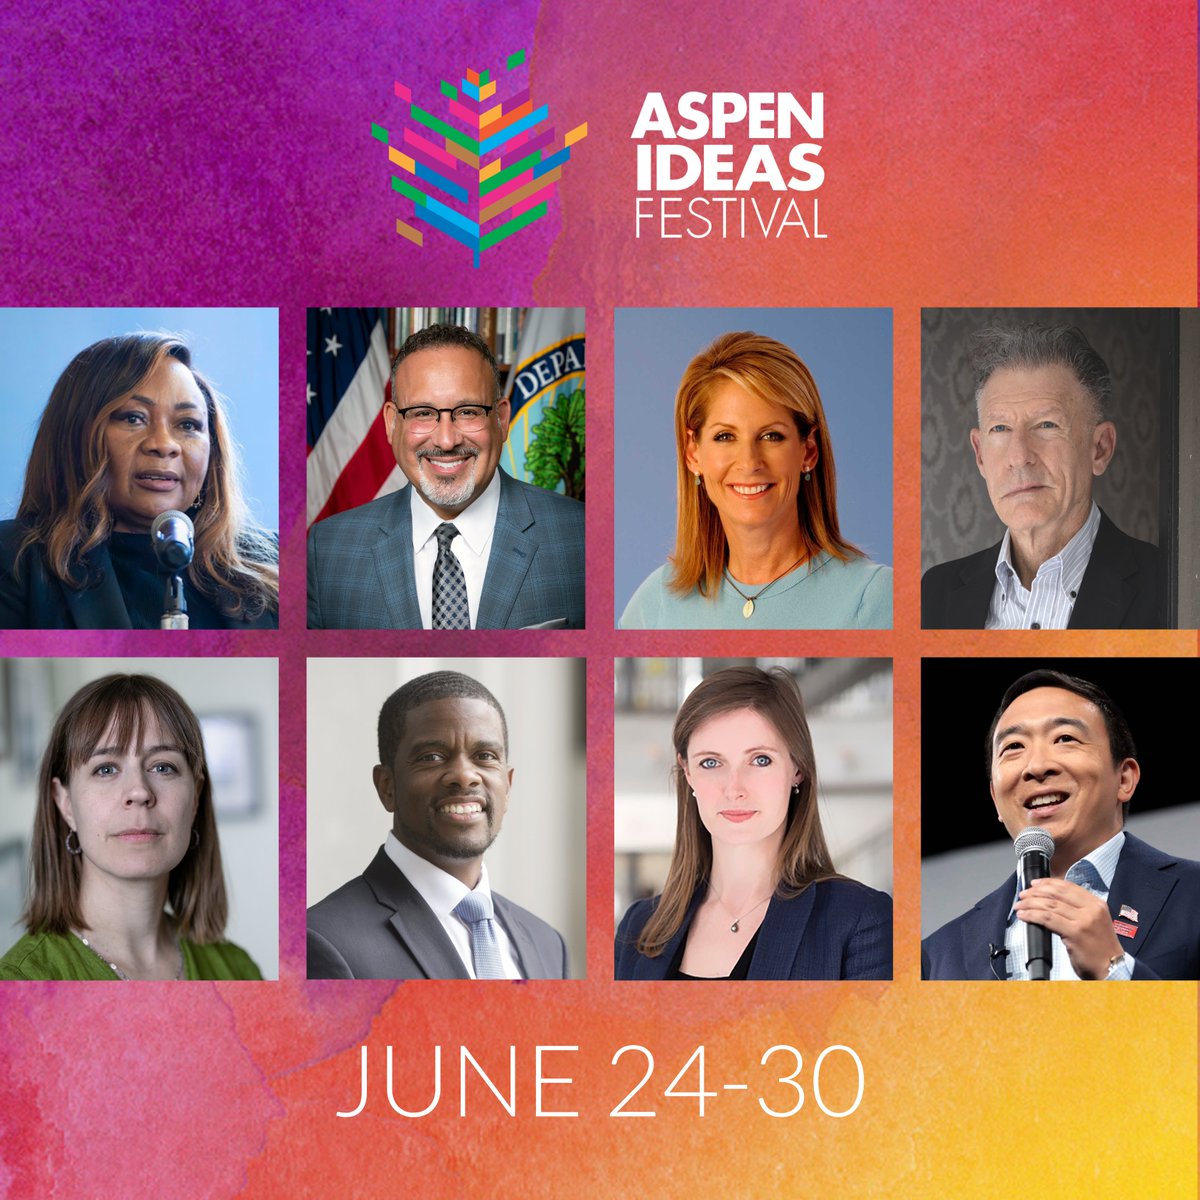 At the Aspen Ideas Festival, join hundreds of influential speakers for conversations that will help shape our future, including the latest additions to our lineup: @CathFlowers @SecCardona @perripeltz @LyleLovett @Dorothy410berry @melvincarter3 @AlexReeveGivens @AndrewYang